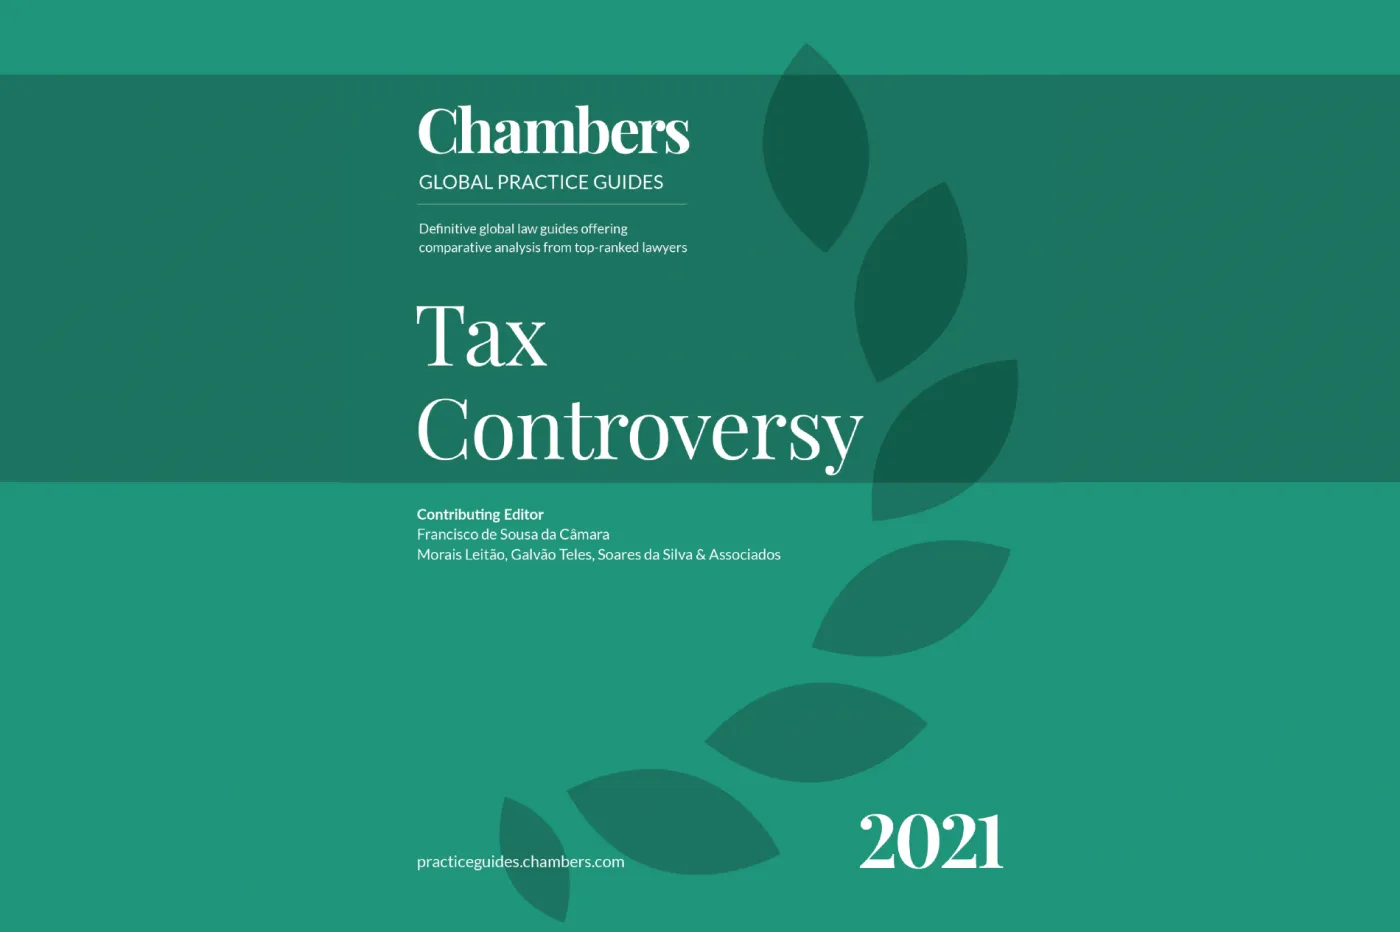 Chambers Global Practice Guide - Tax Controversy 2021